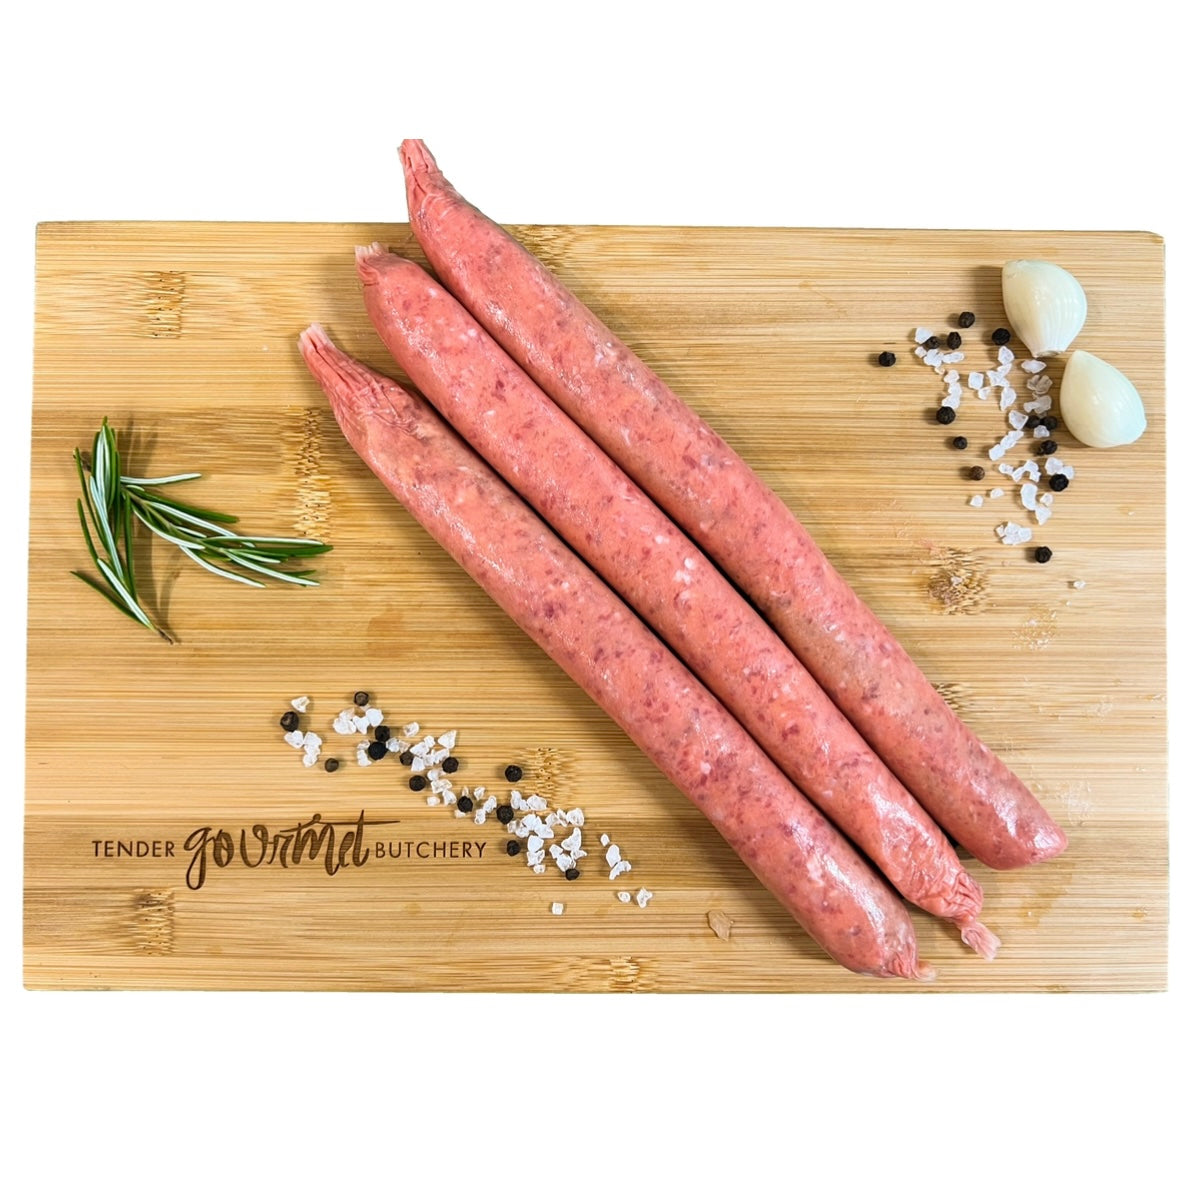 6 x Thin Beef Breakfast Sausages (approx. 480g -530g)